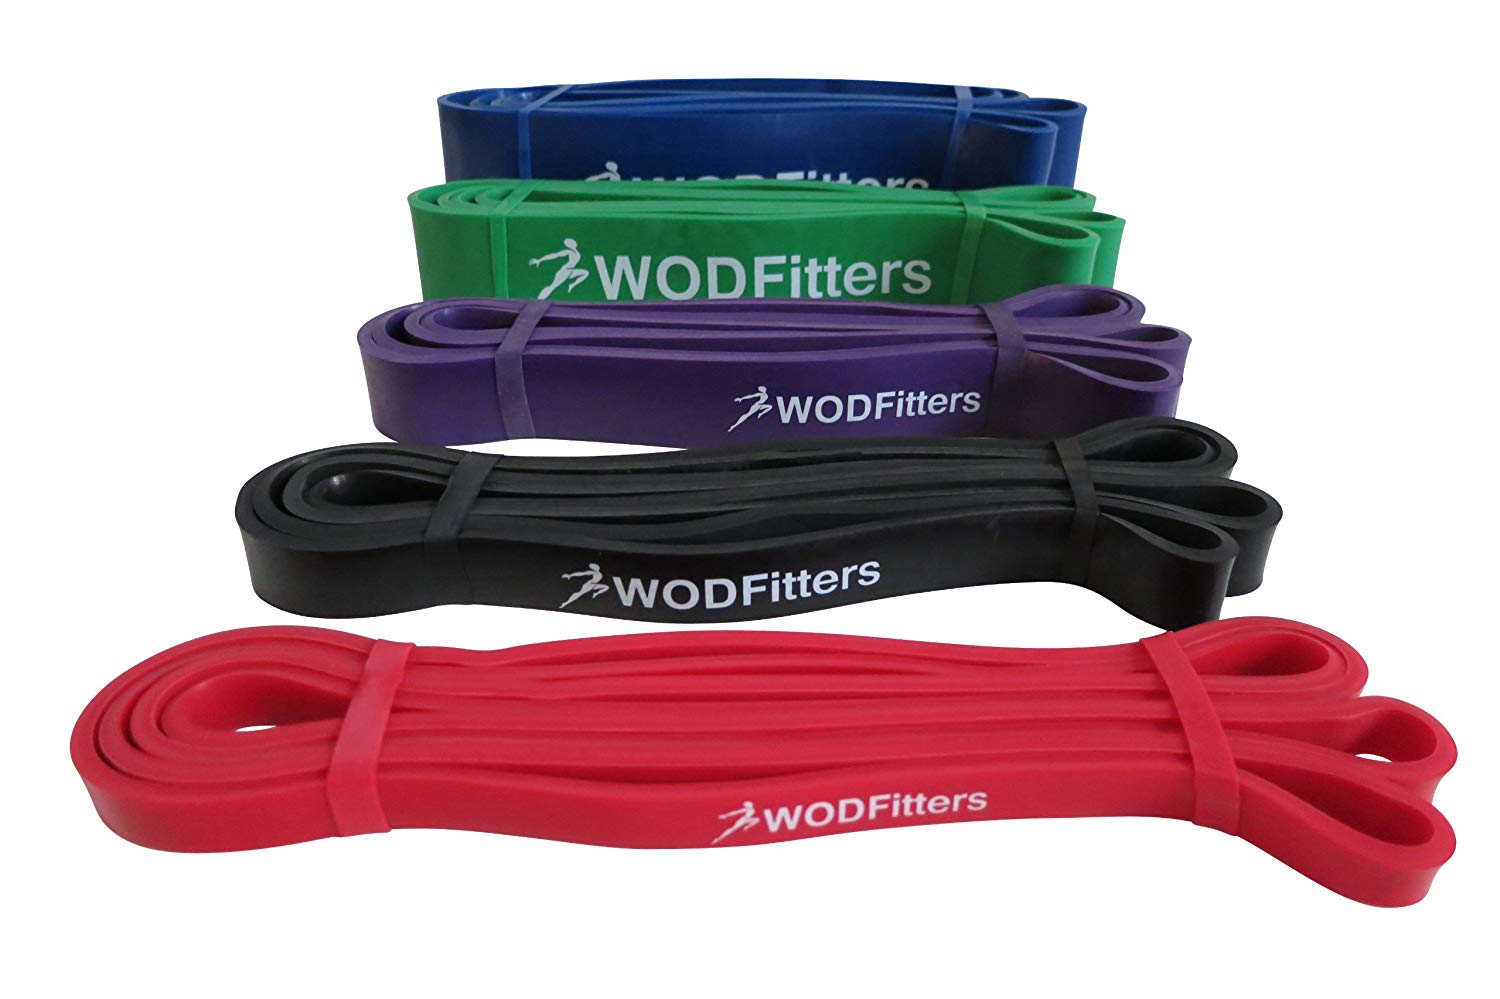 Home workout bands